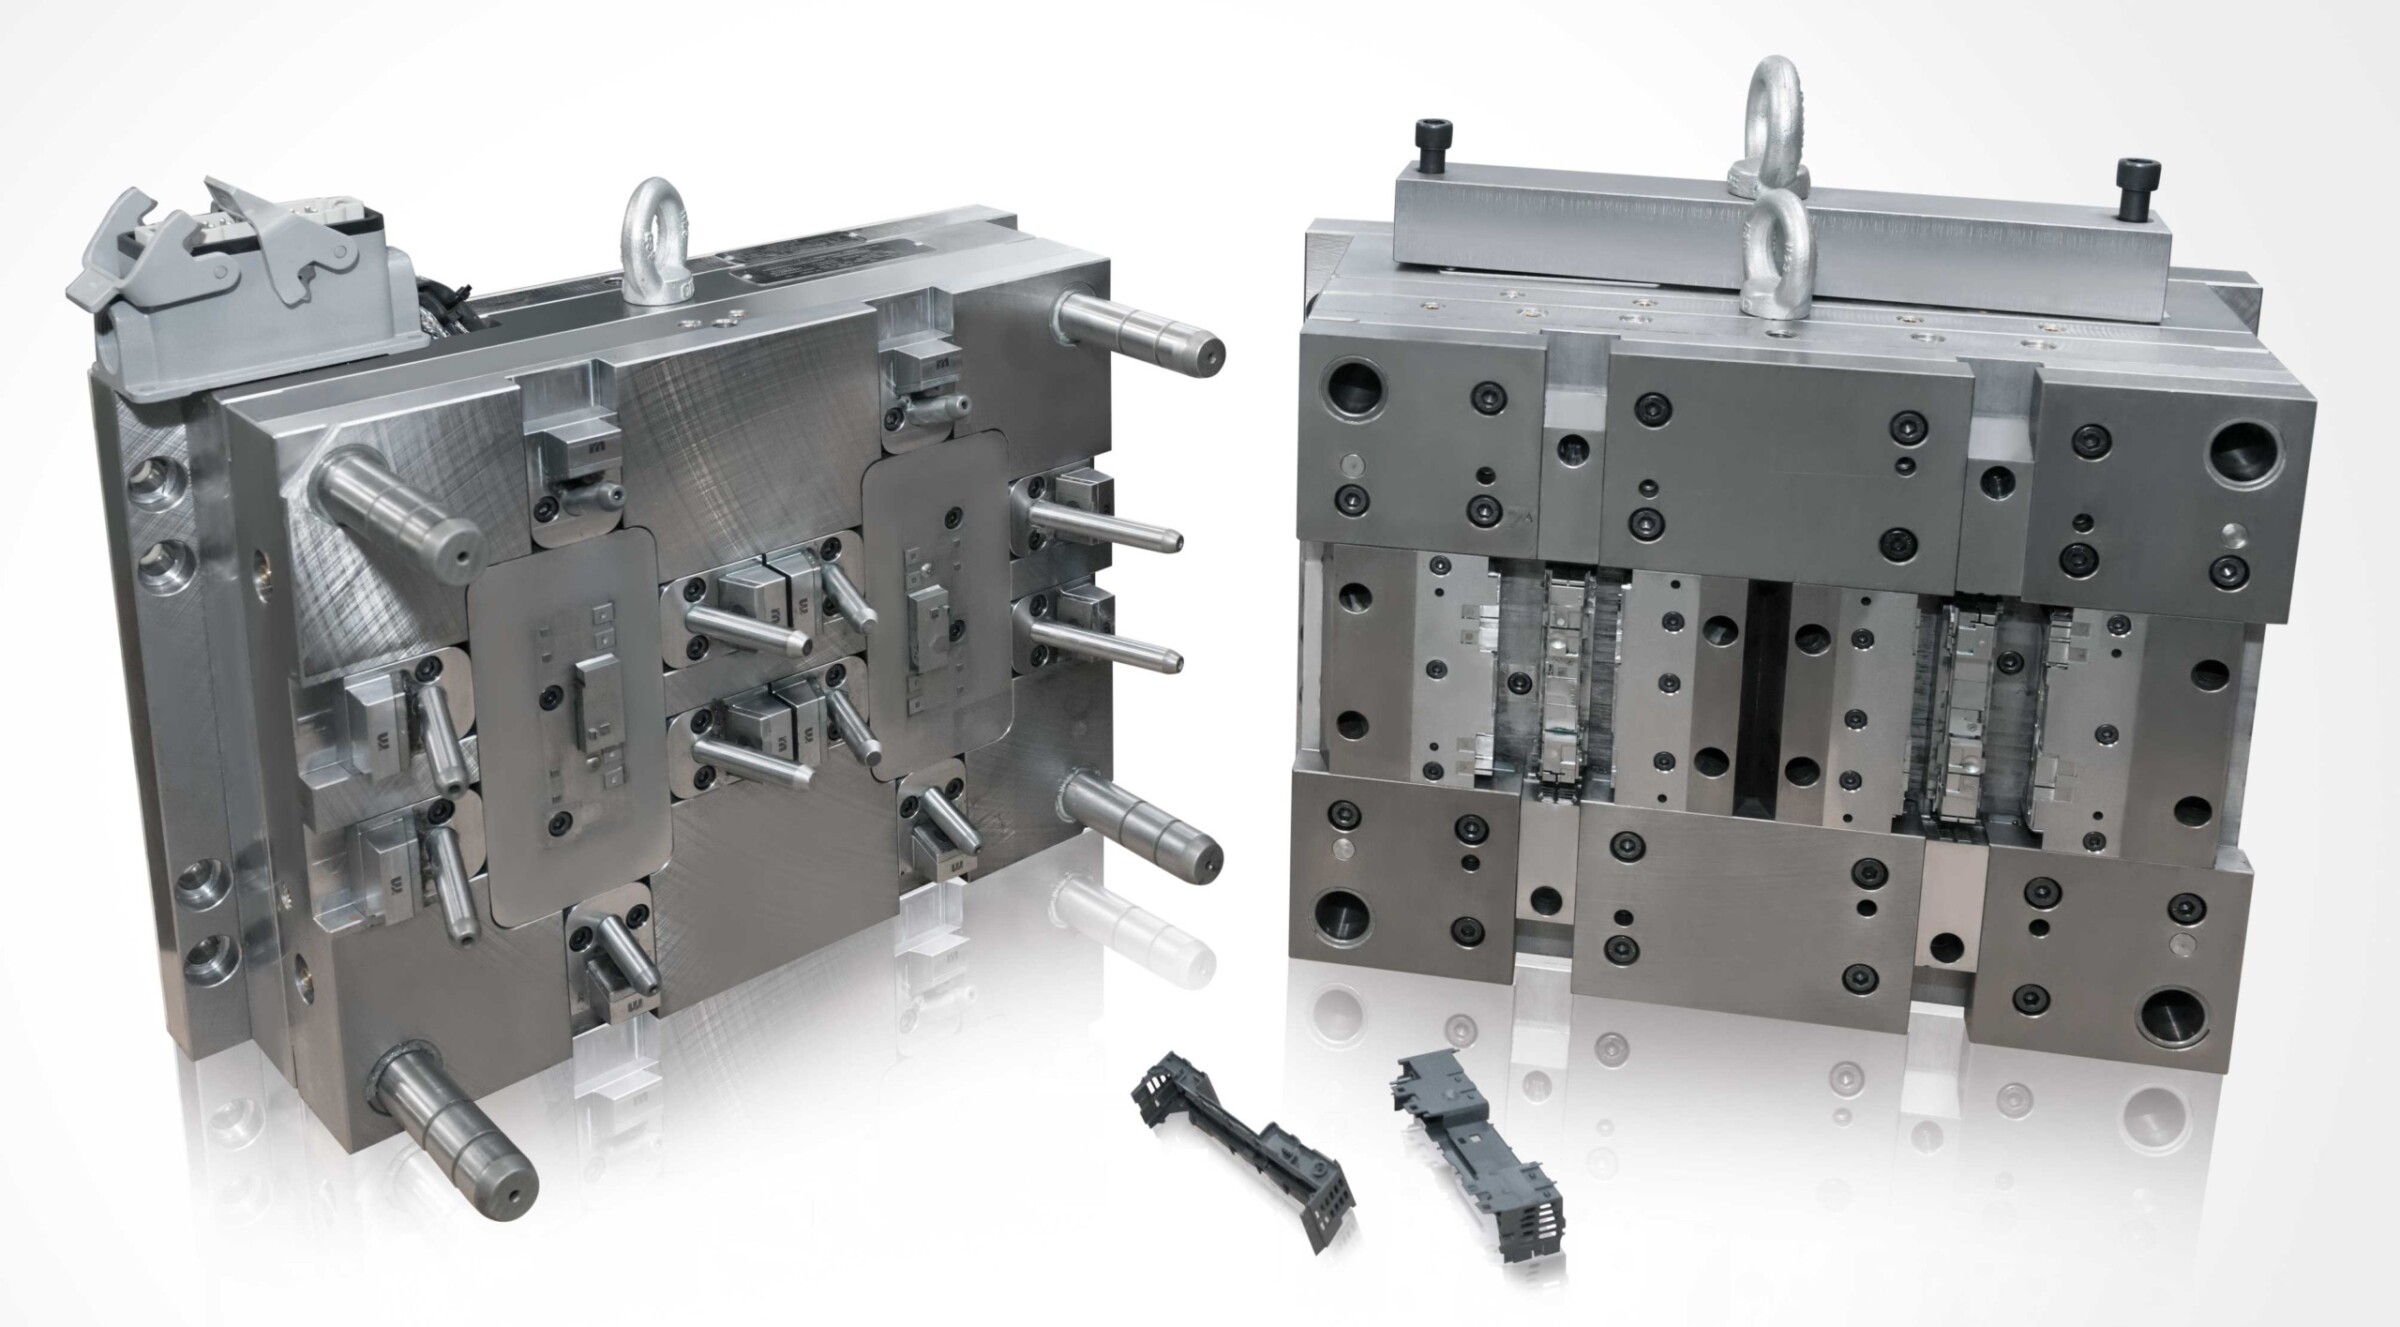 An injection mould for components of an industrial control system with two cavities and heated melt guidance system. The movable elements form a tight seal in their end positions.